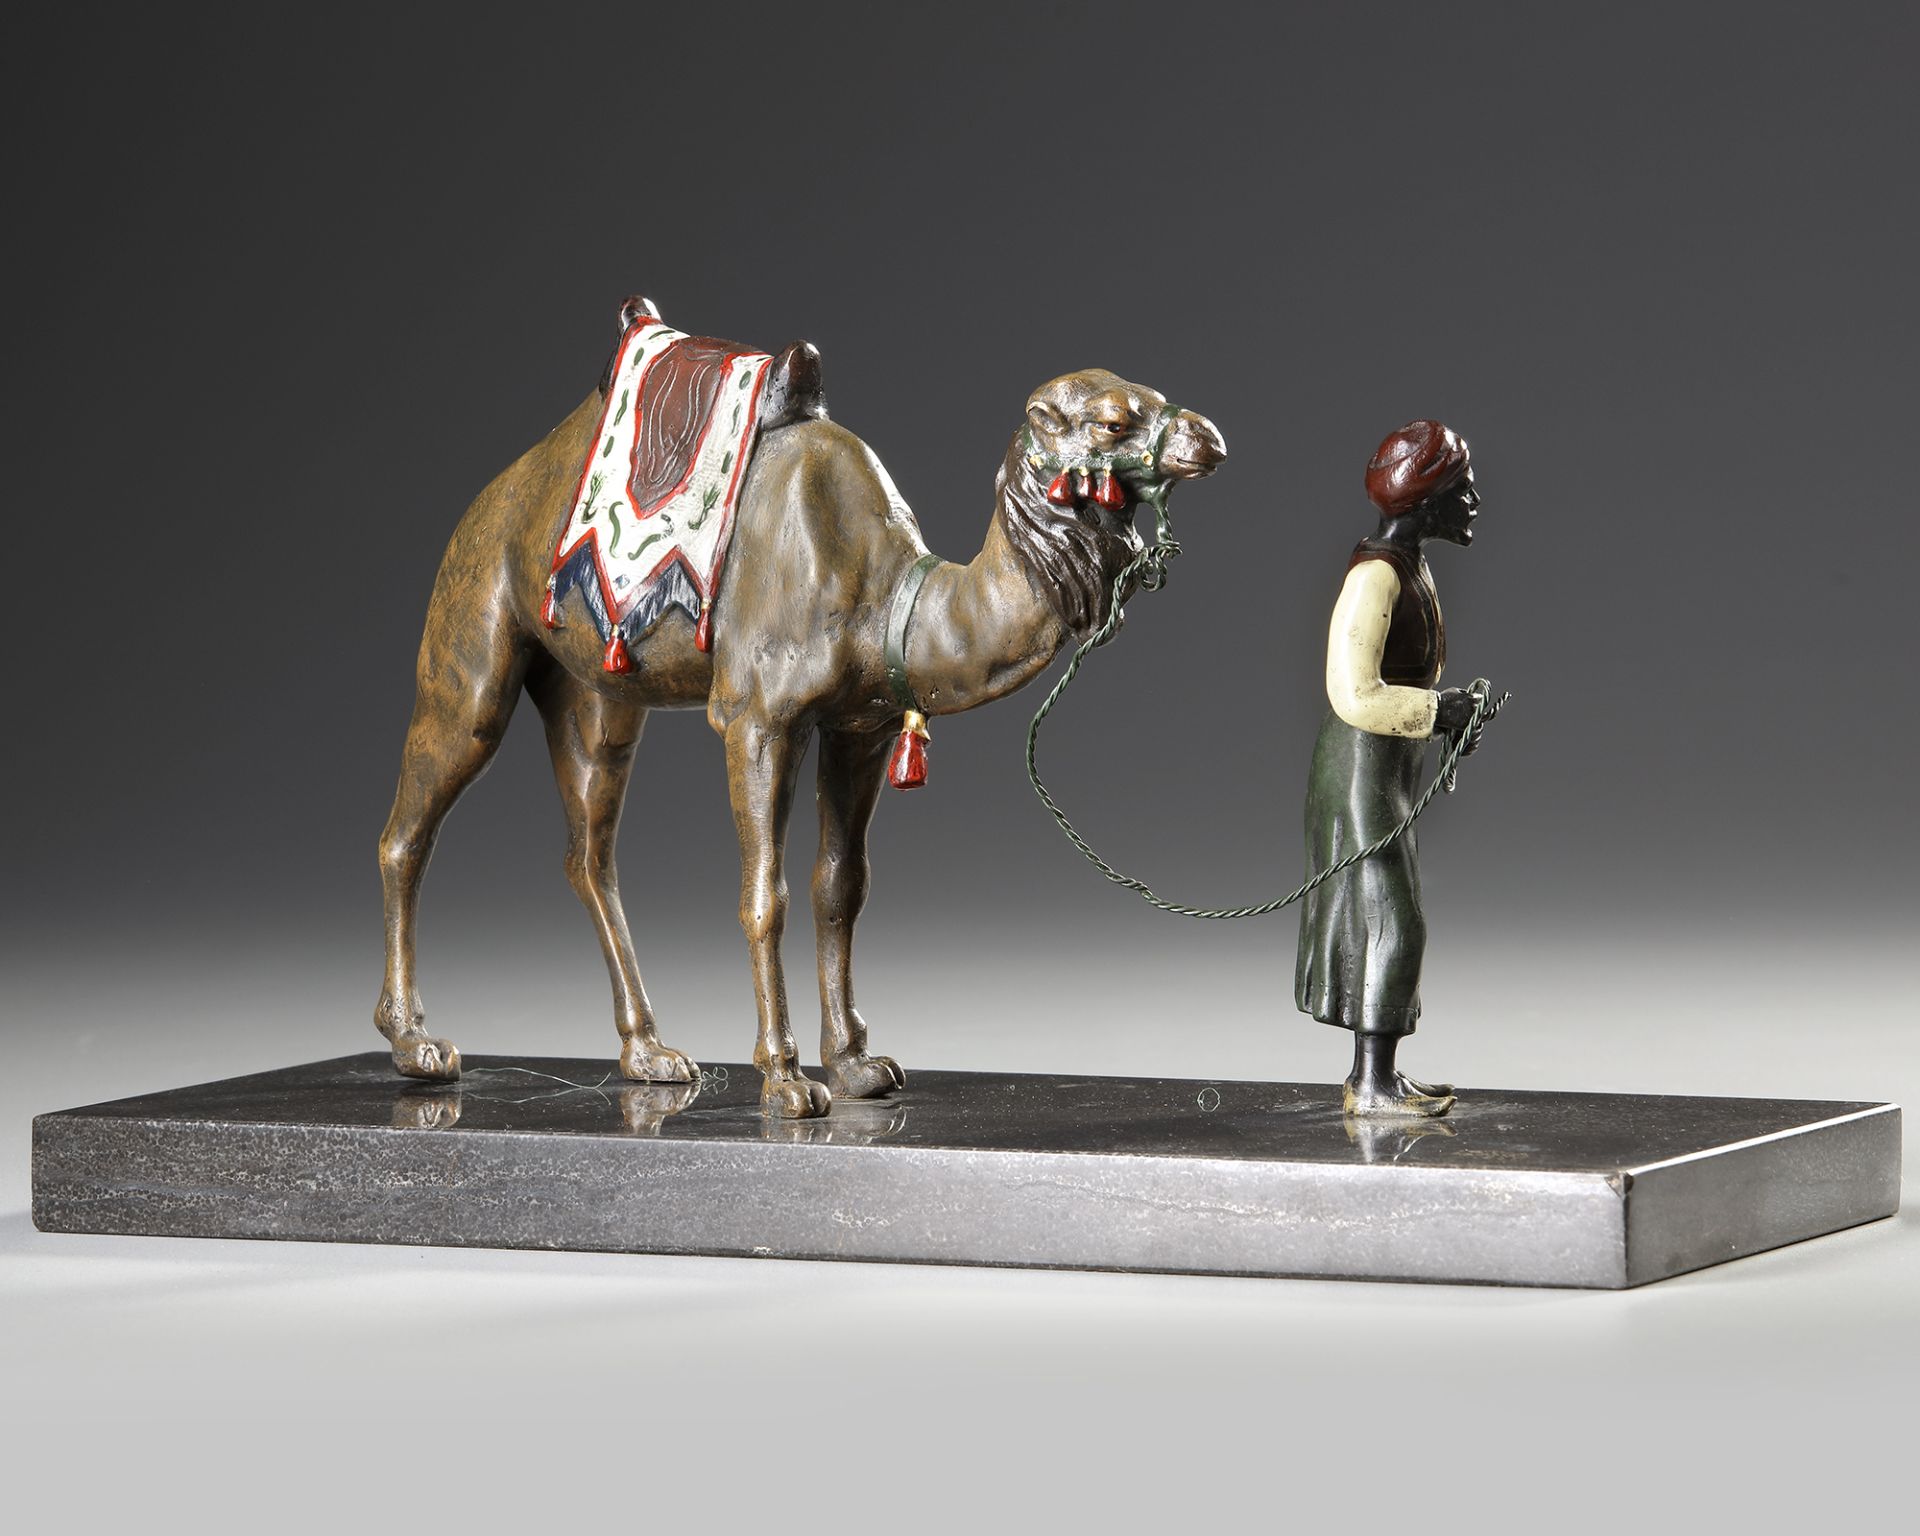 A VIENNA PAINTED BRONZE CAMEL AND A RIDER, AUSTRIA, EARLY 20TH CENTURY - Image 3 of 3